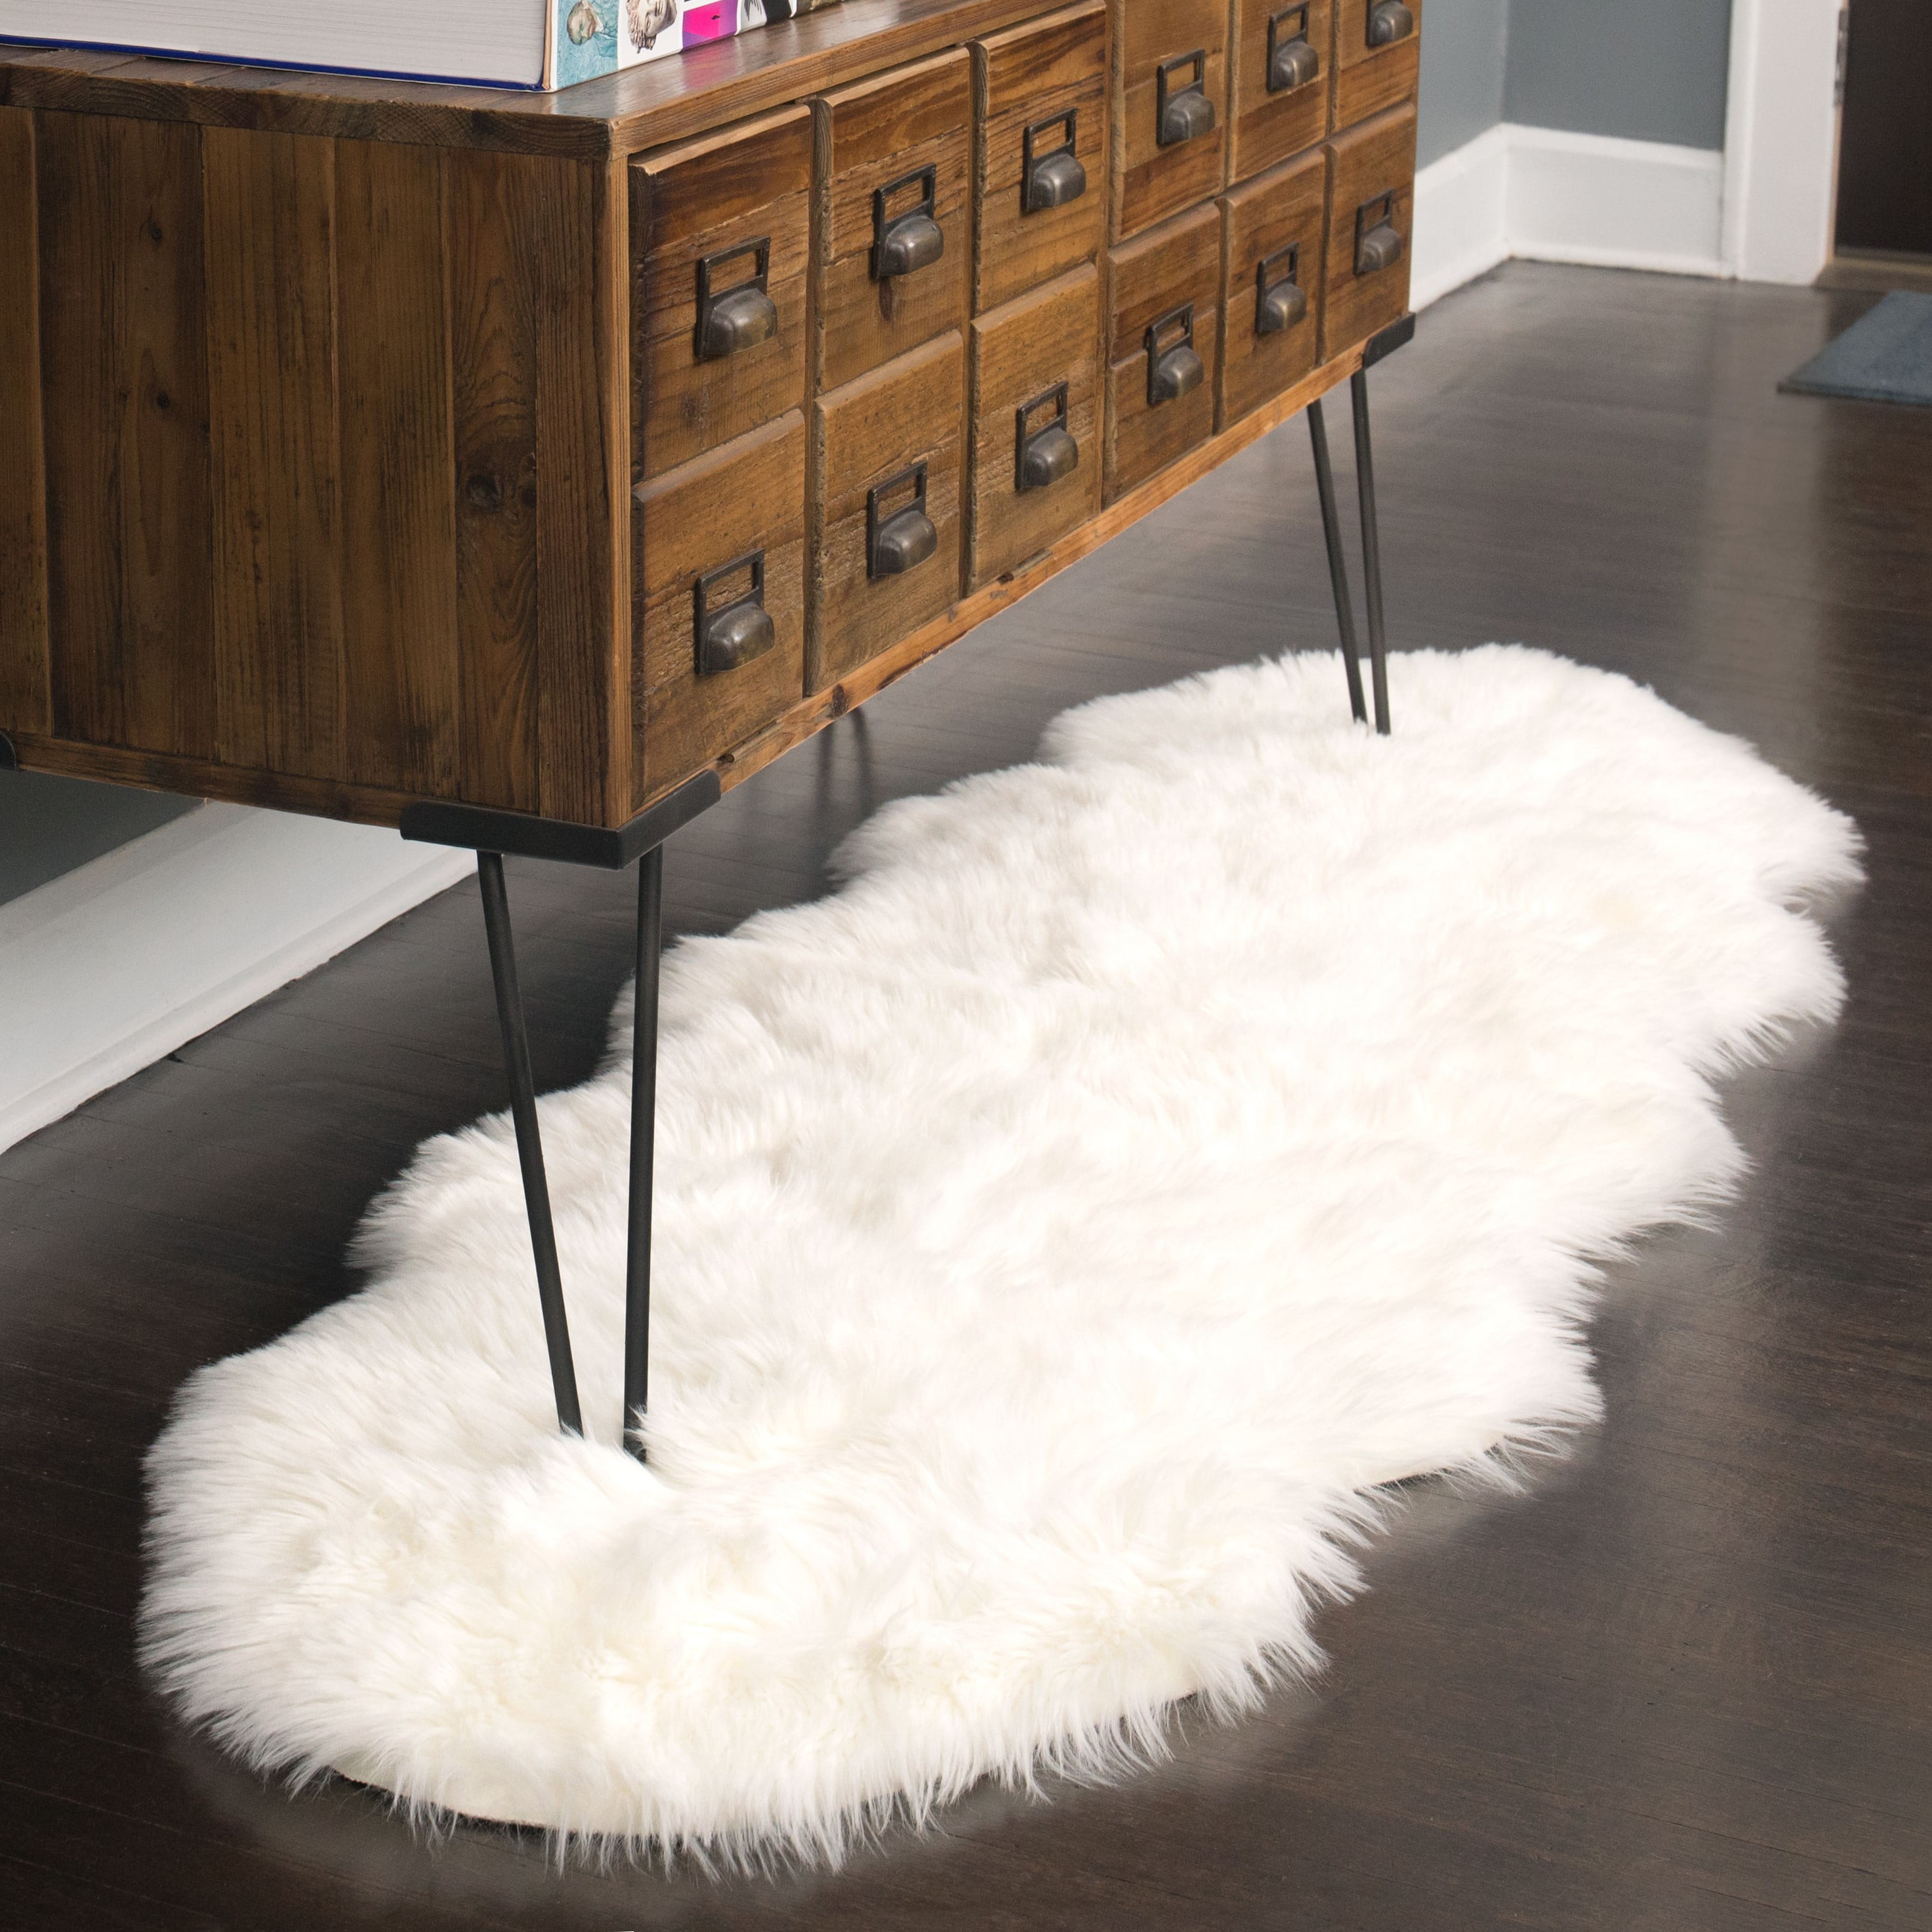 Walk on Me Gray 6 ft. x 9 ft. Faux Fur Luxuriously Soft and Eco Friendly Area Rug